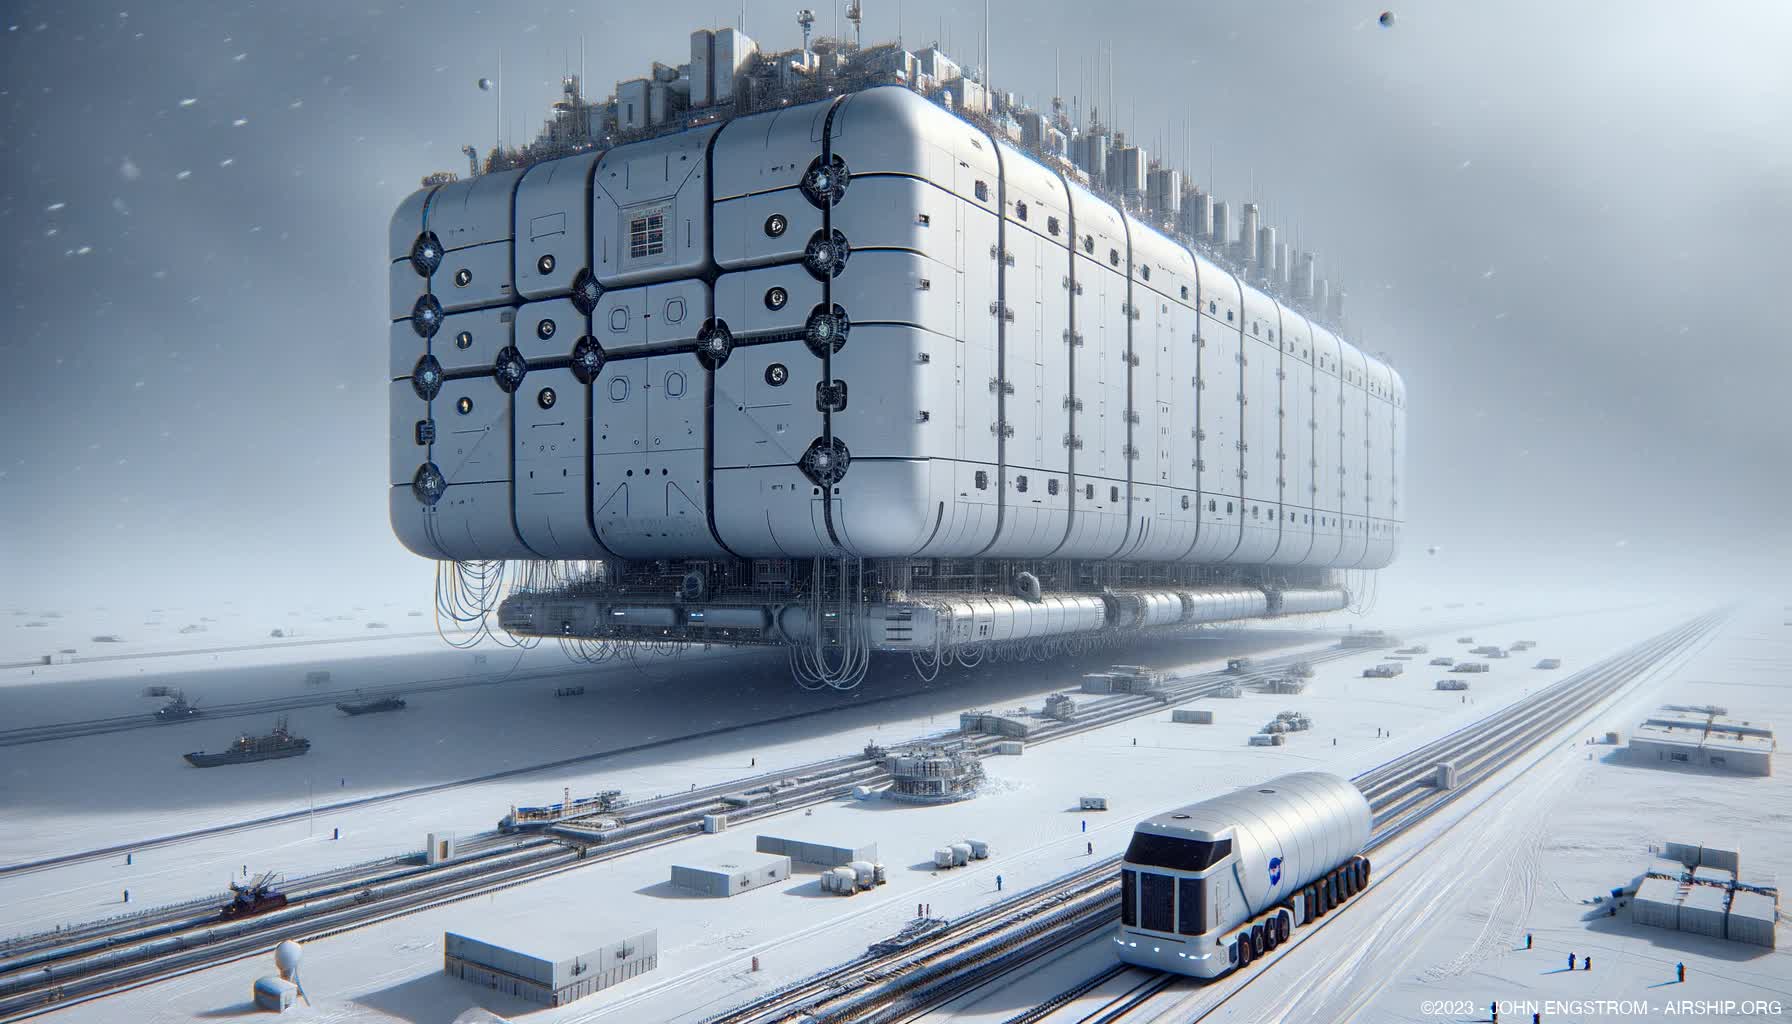 Airship-Assembled-Arctic-Spaceports-11